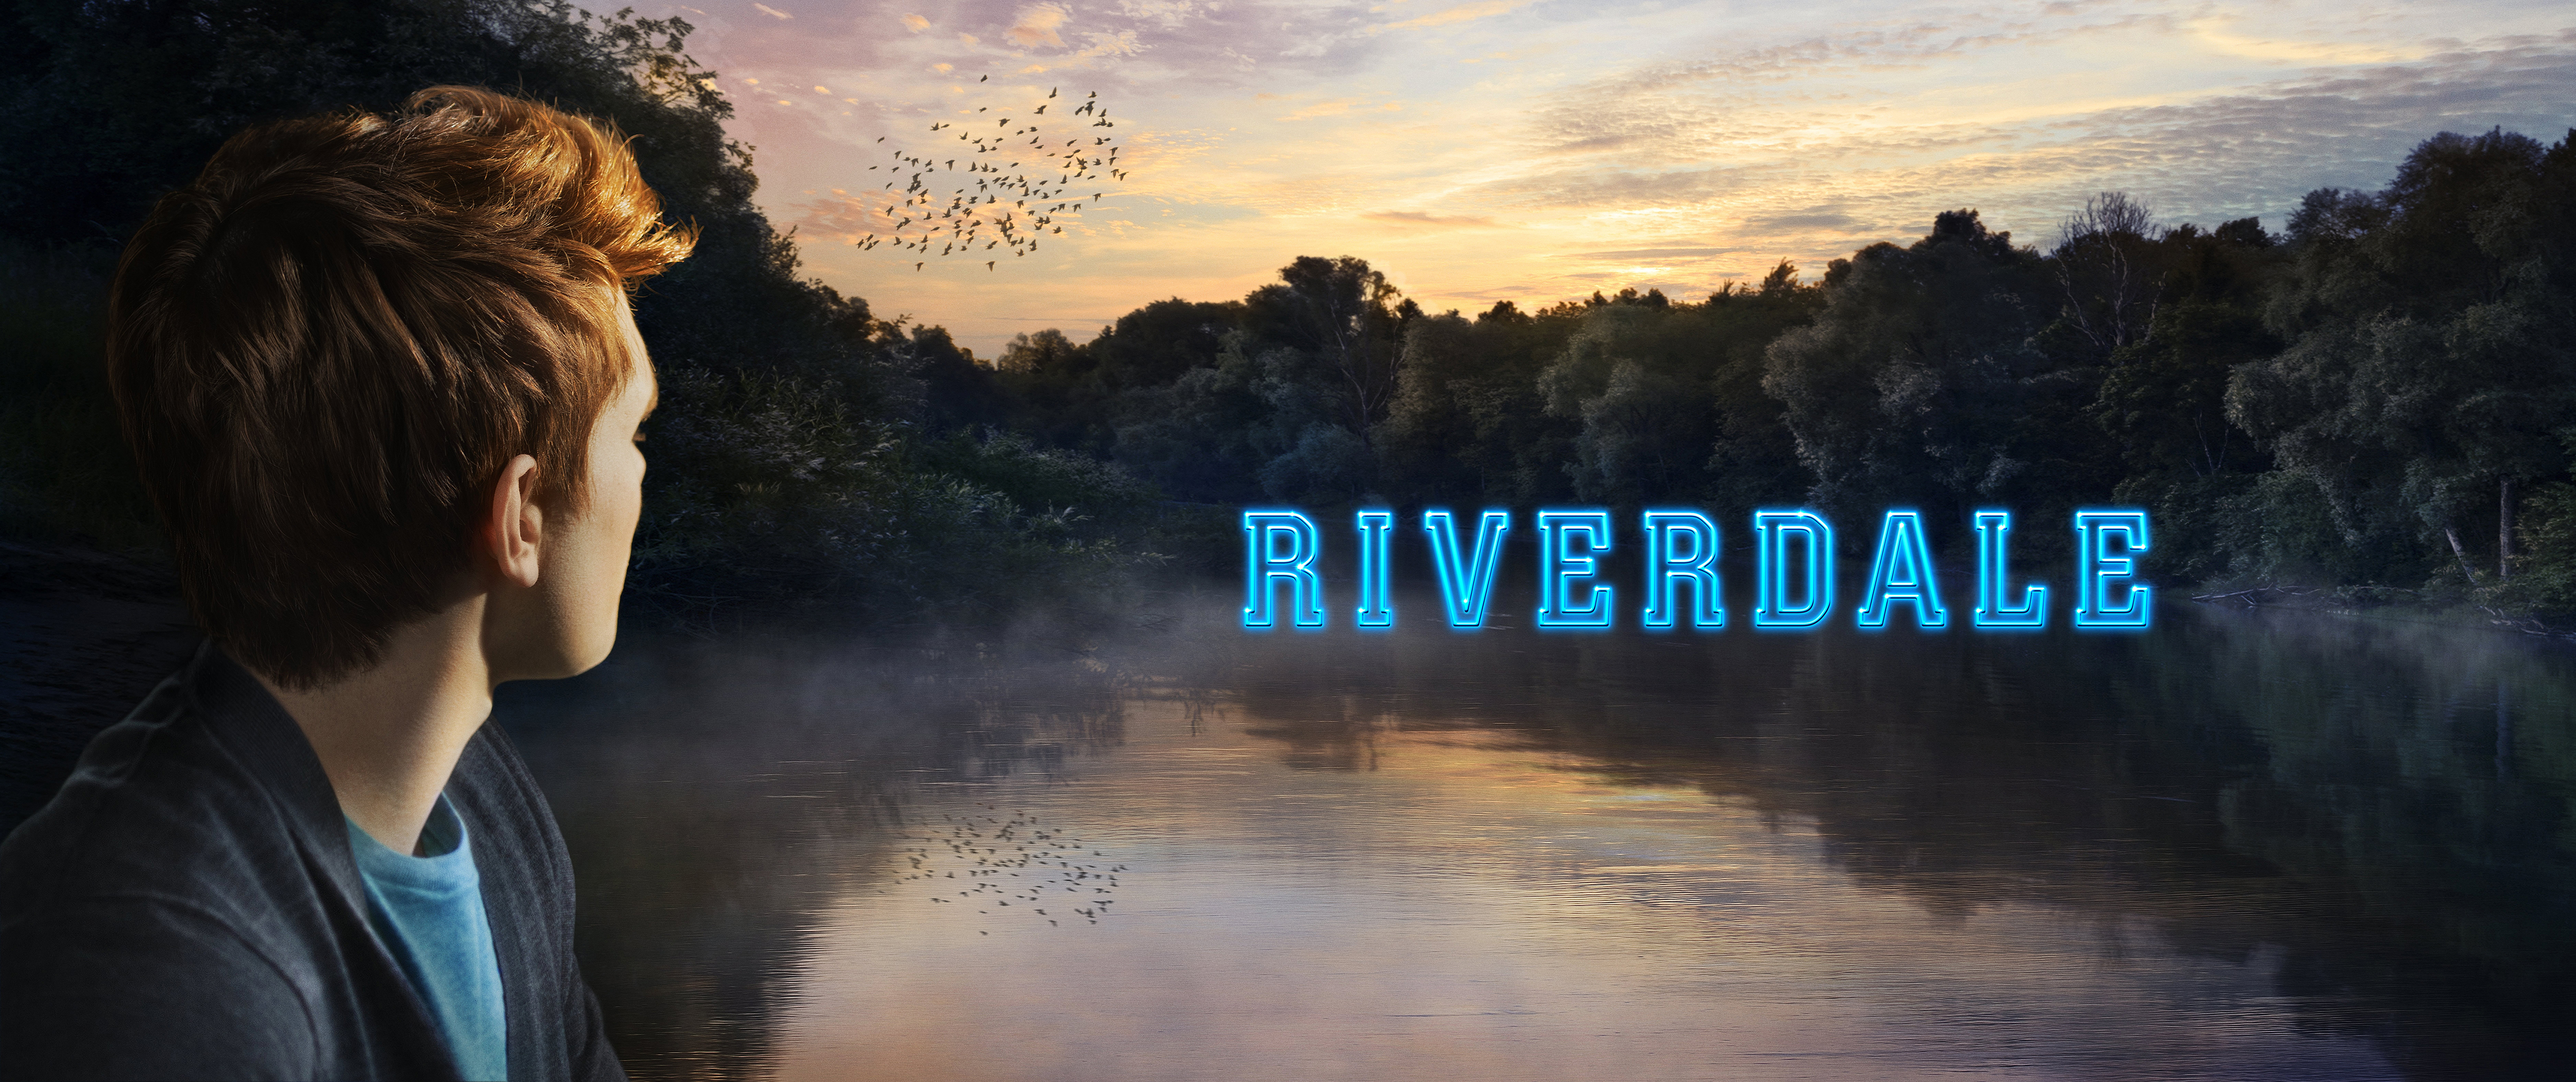 Riverdale 5k, HD Tv Shows, 4k Wallpapers, Images ...